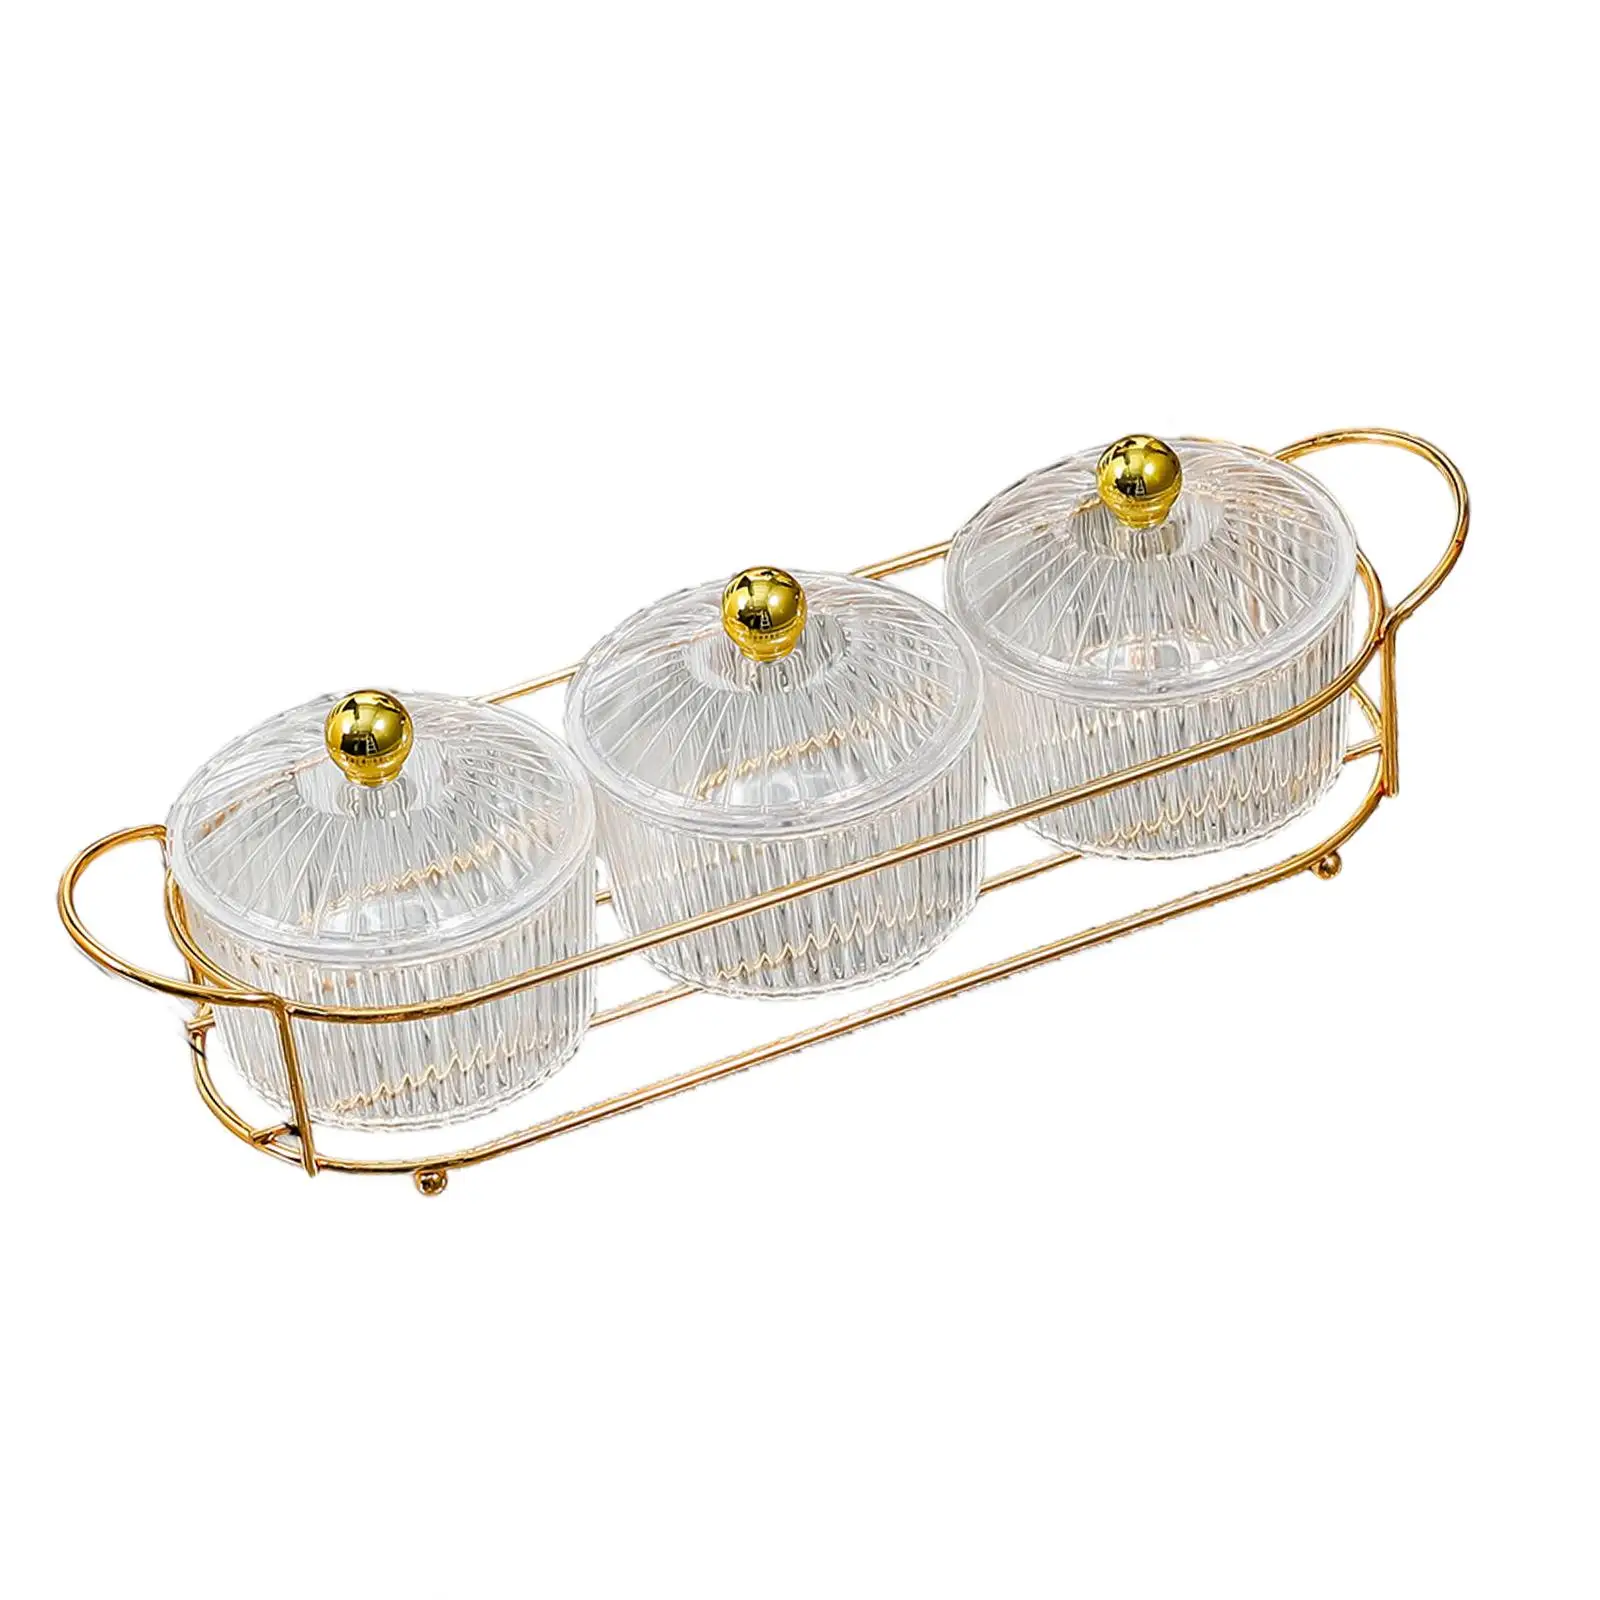 Light Luxury Appetizer Tray Decor Condiment Tray Organizer Snack Serving Tray for Nut